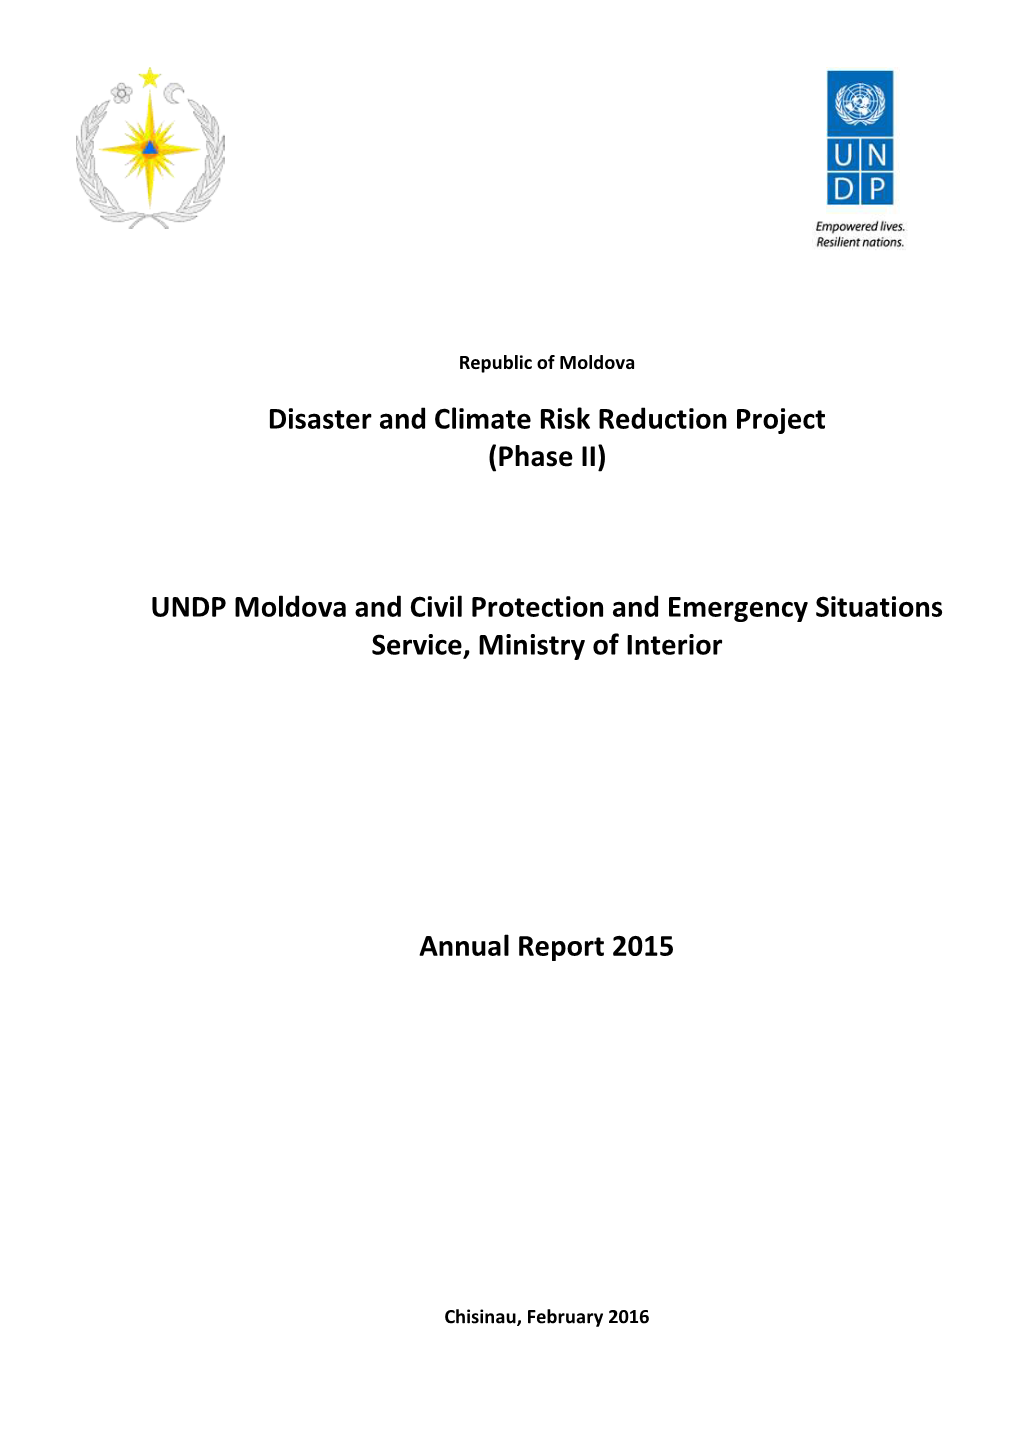 Disaster and Climate Risk Reduction Project (Phase II)